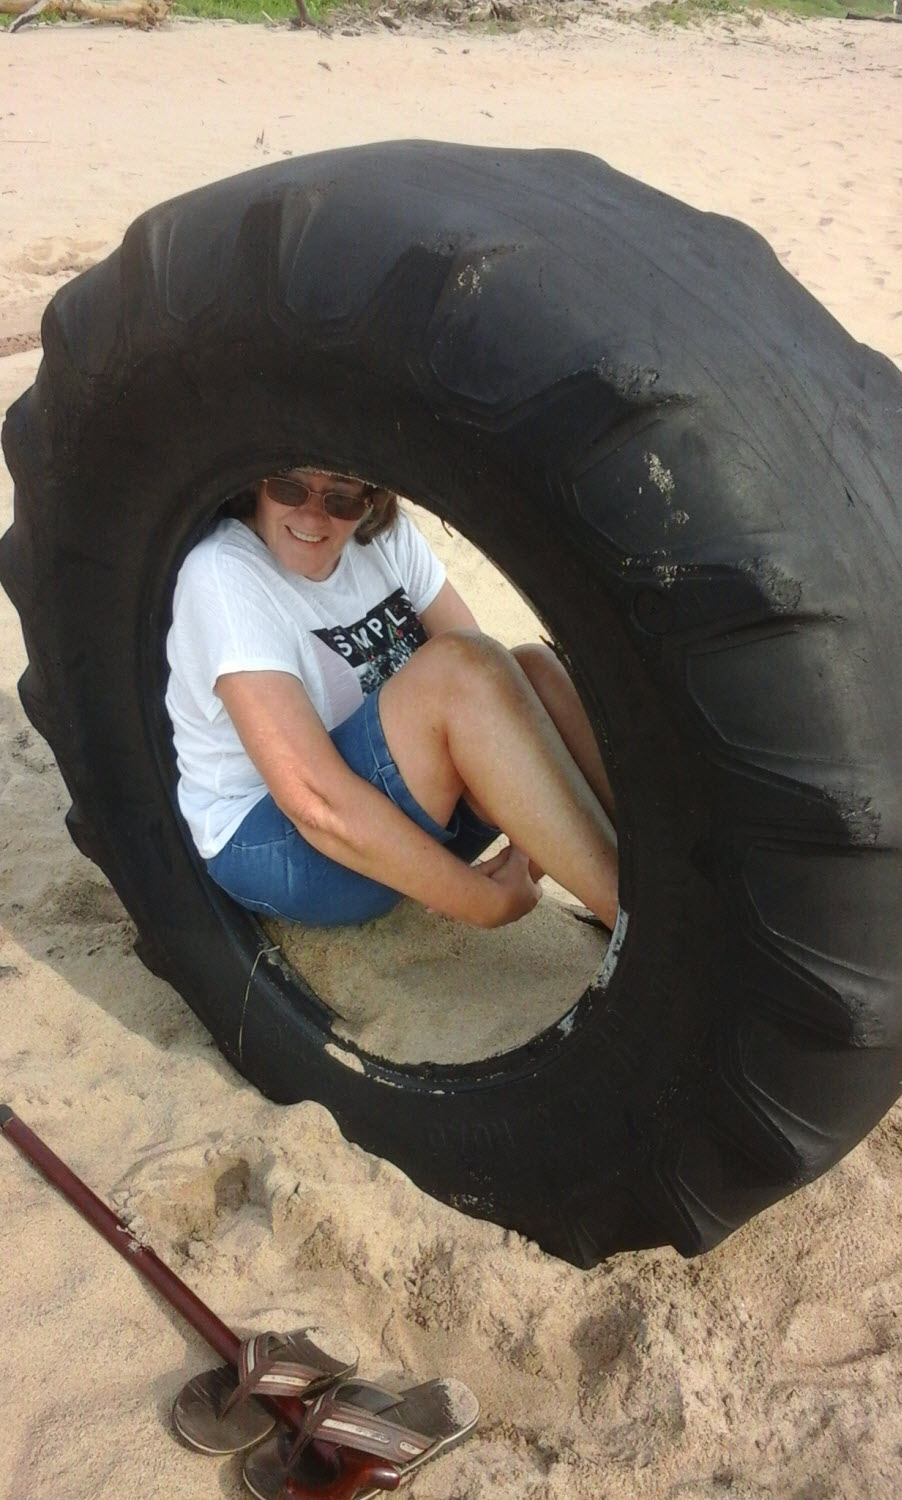 Me, at Mtwalume Beach, seeking shelter against the sun in the discarded tyre of a bulldozer